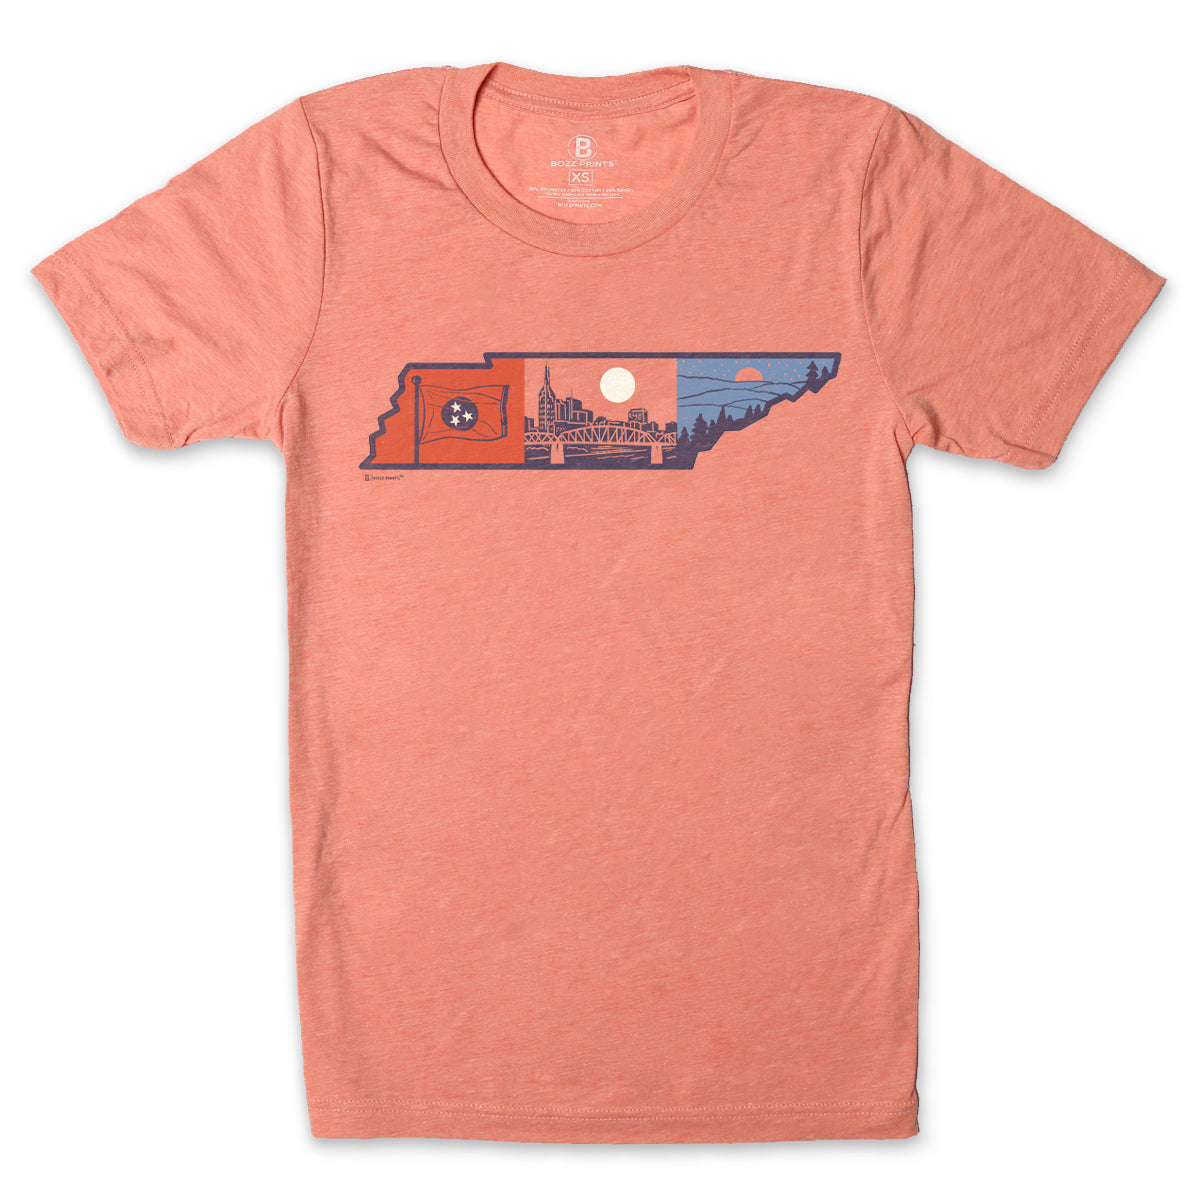 Layers of Tennessee T-Shirt